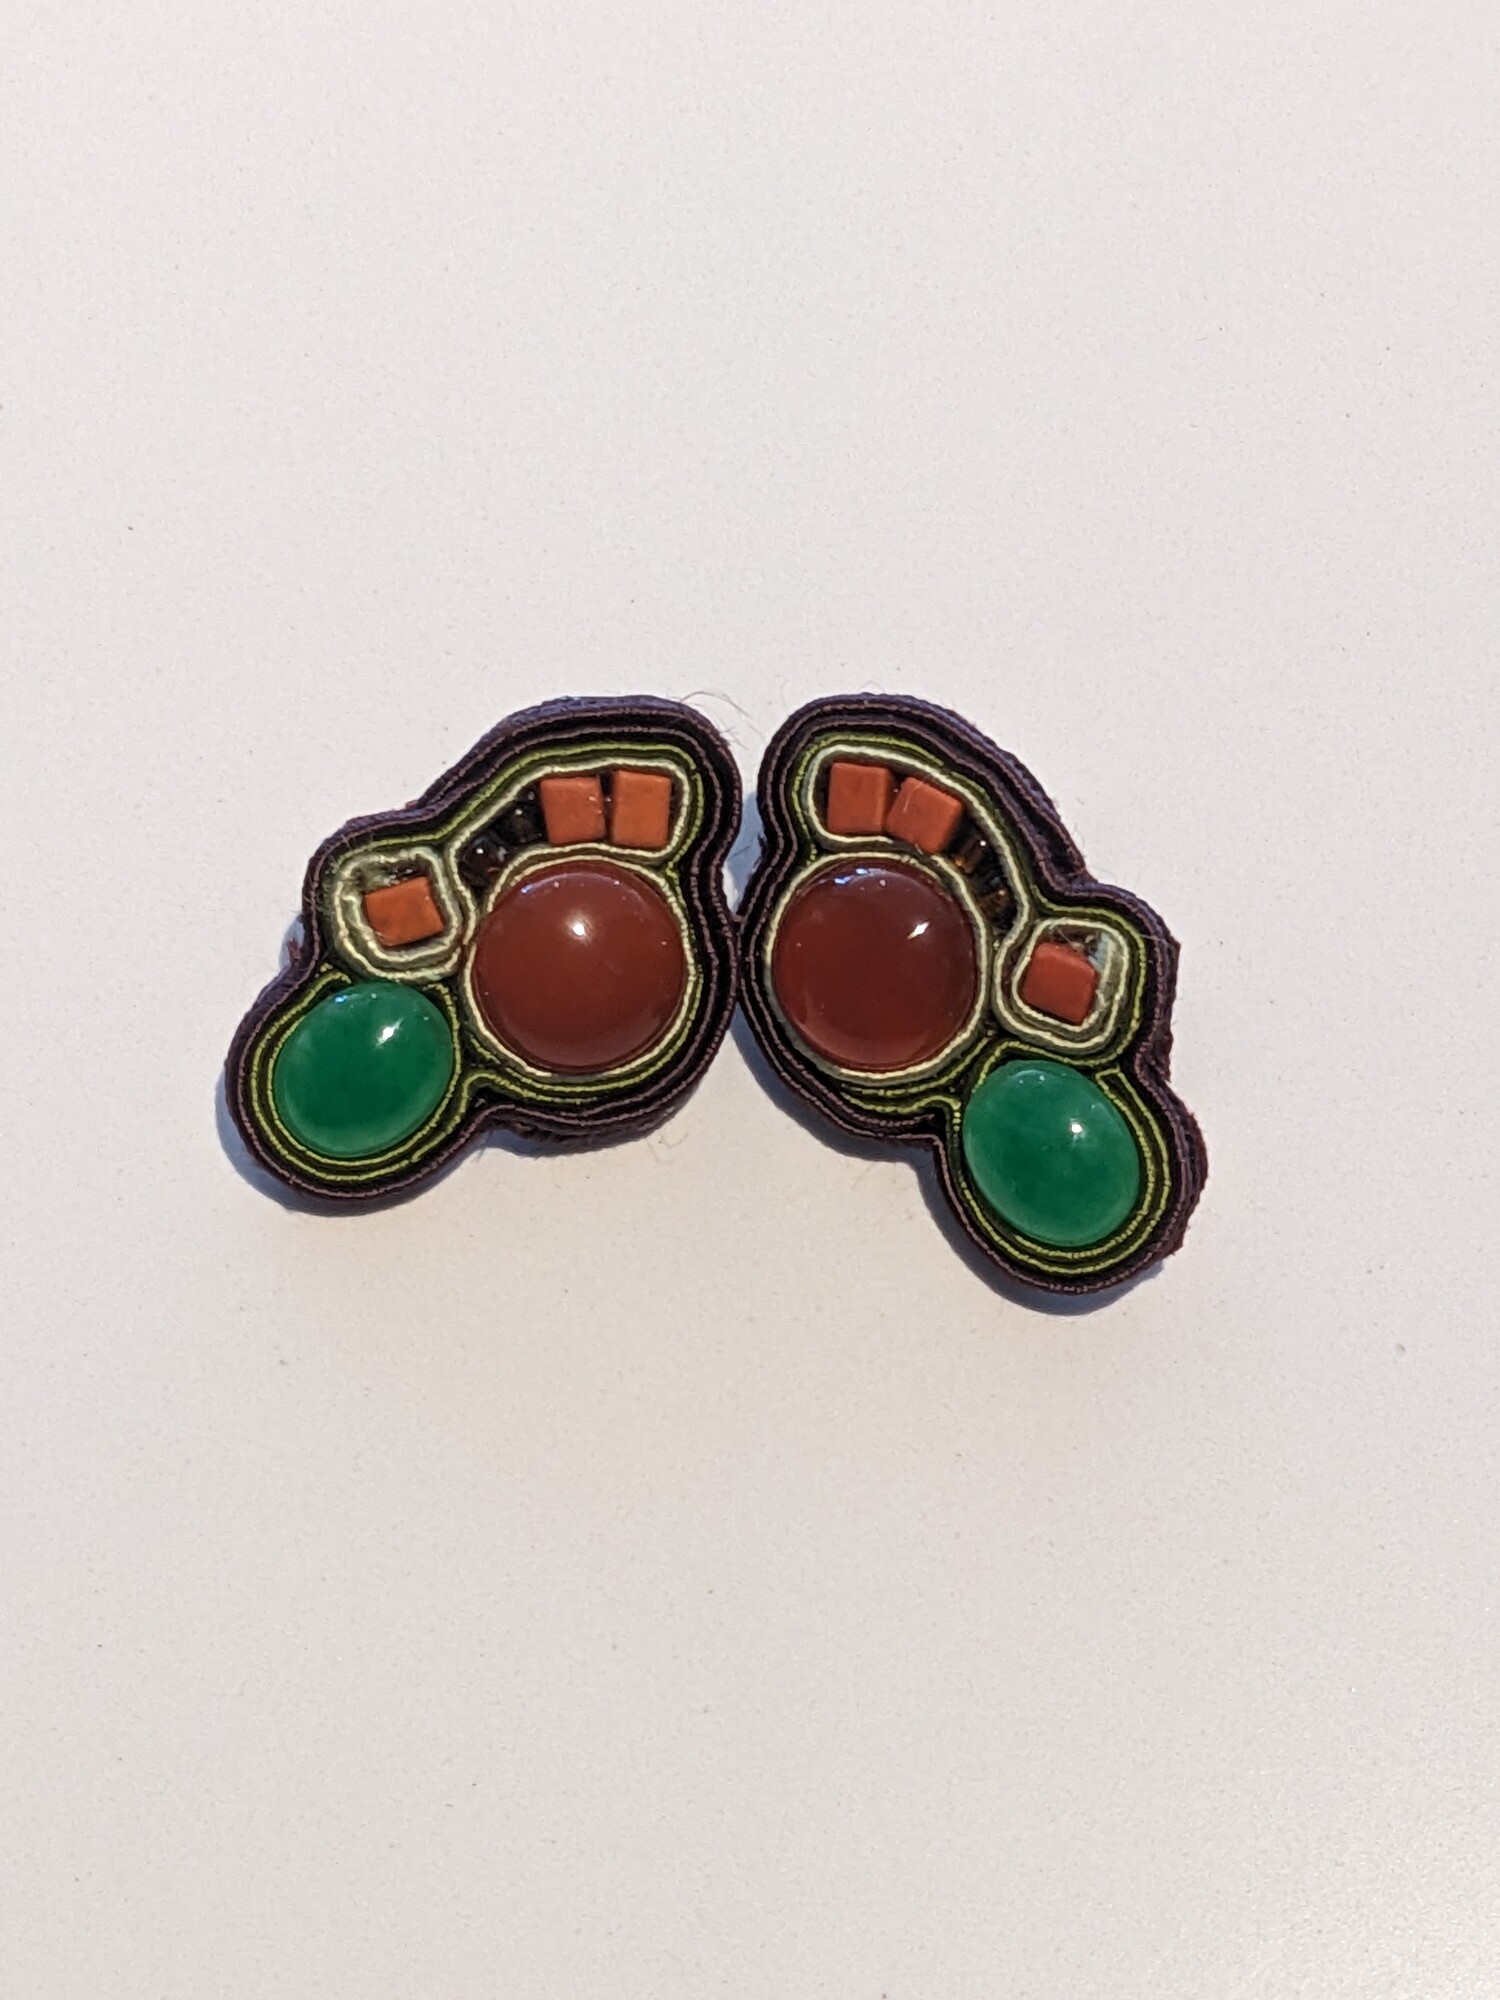 Soutache Earrings
Jama Watts
Jewelry (Soutache)
1.5 in long by 1 in wide
Chalcedony and carnelian cabochons surrounded by green and brown soutache ribbon with terra cotta and copper glass beads.  Backed with maroon ultrasuede. Stainless steel posts.